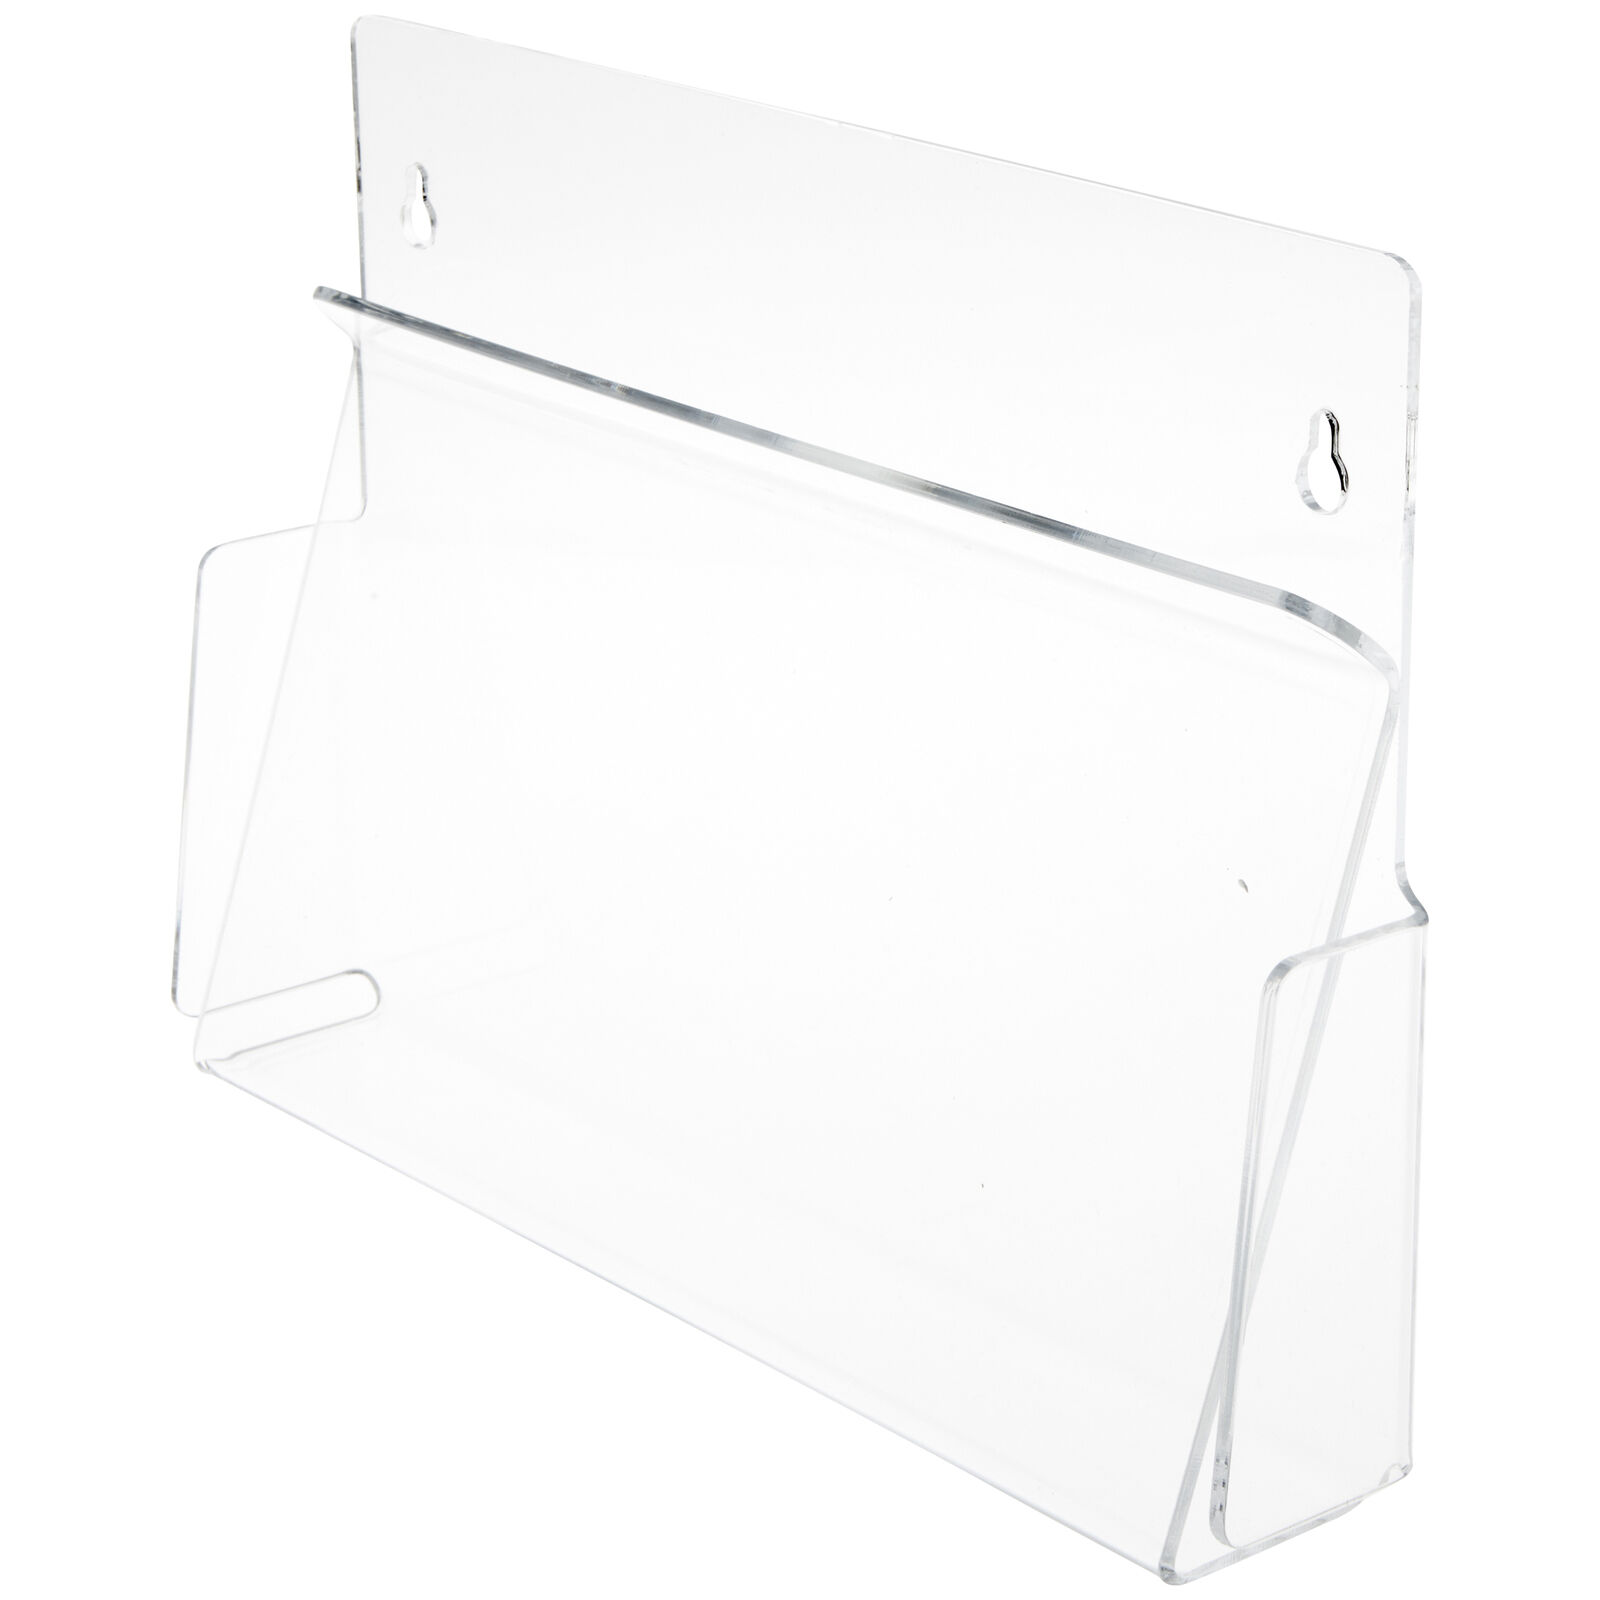 Plymor Clear Acrylic Pinch-style Literature Holder, 8"h X 11.75"w X 2"d (2 Pack)